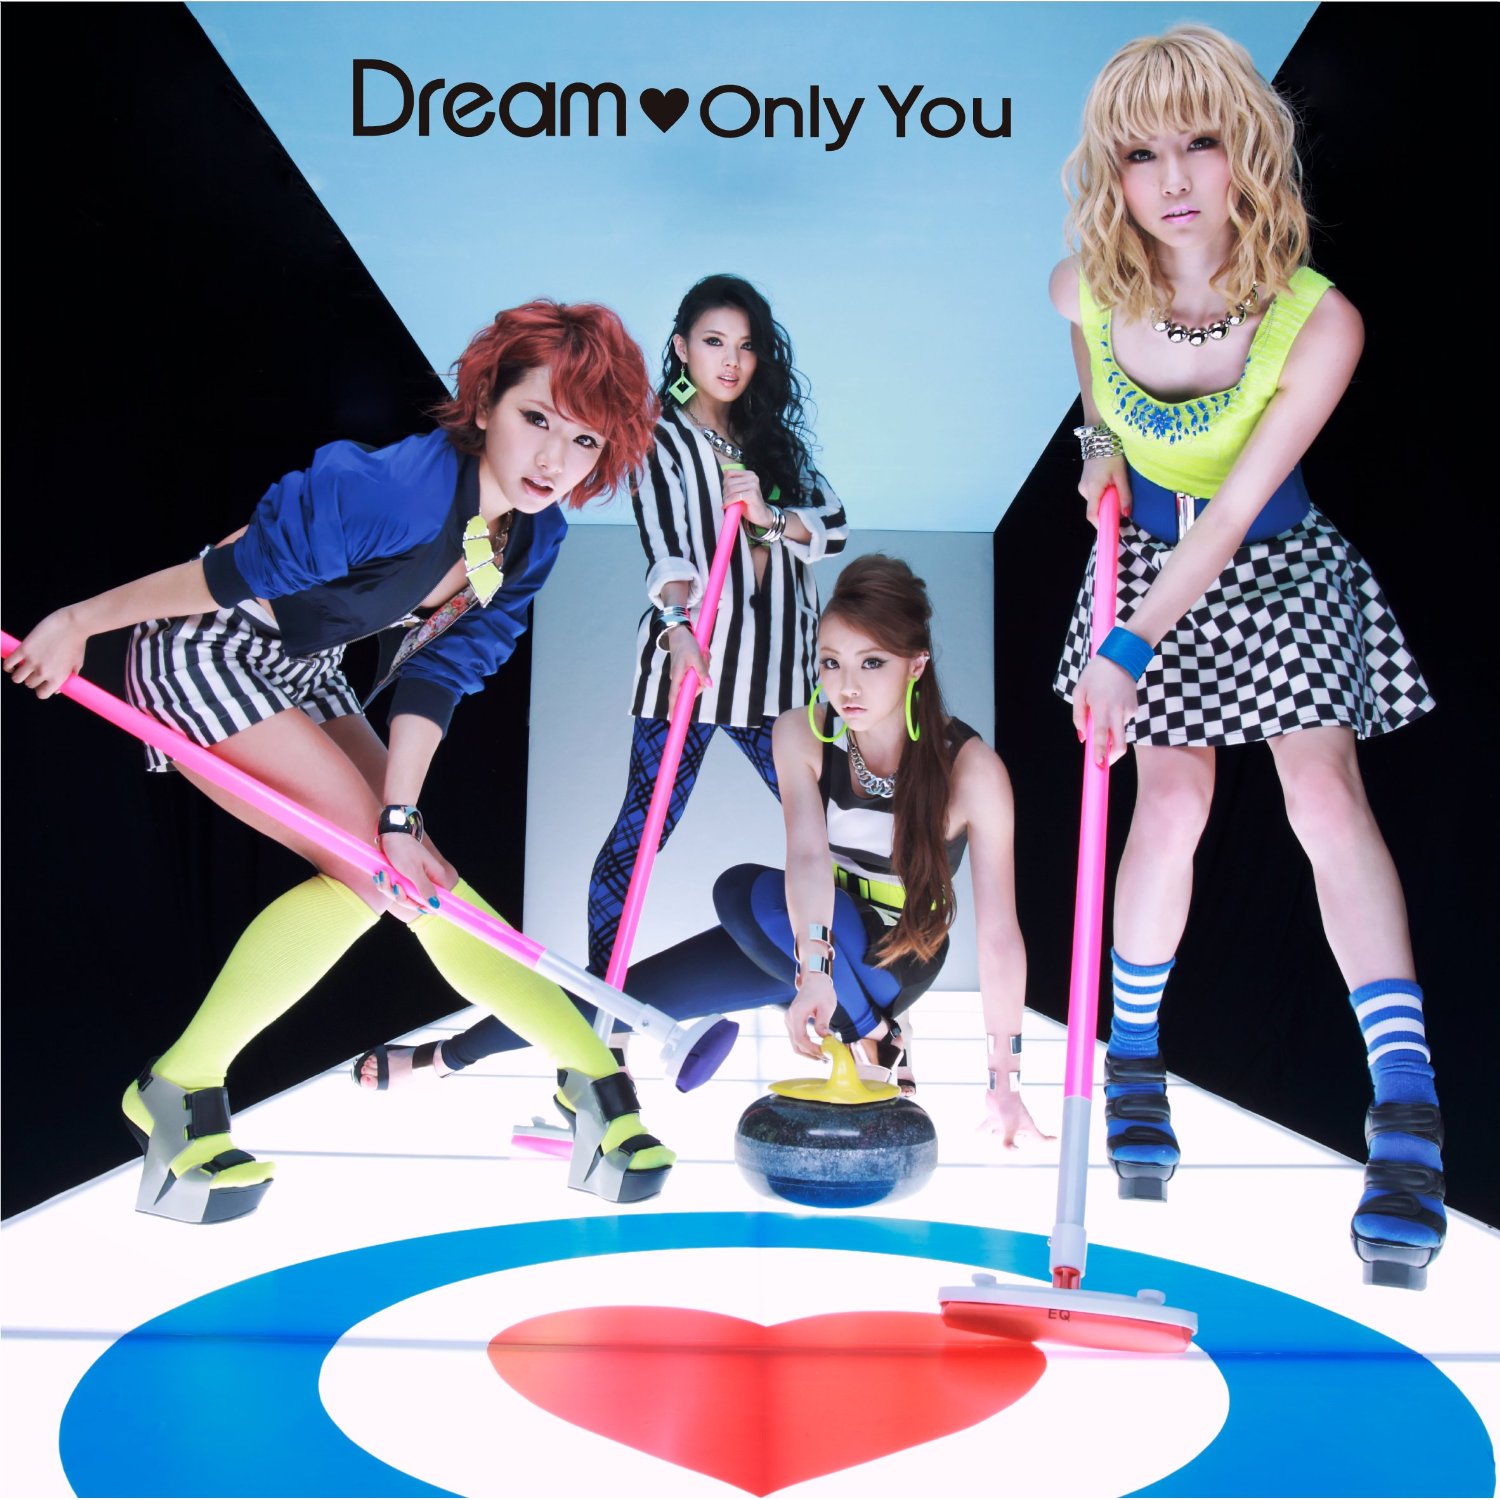 Dreamの代表曲：「Only You」